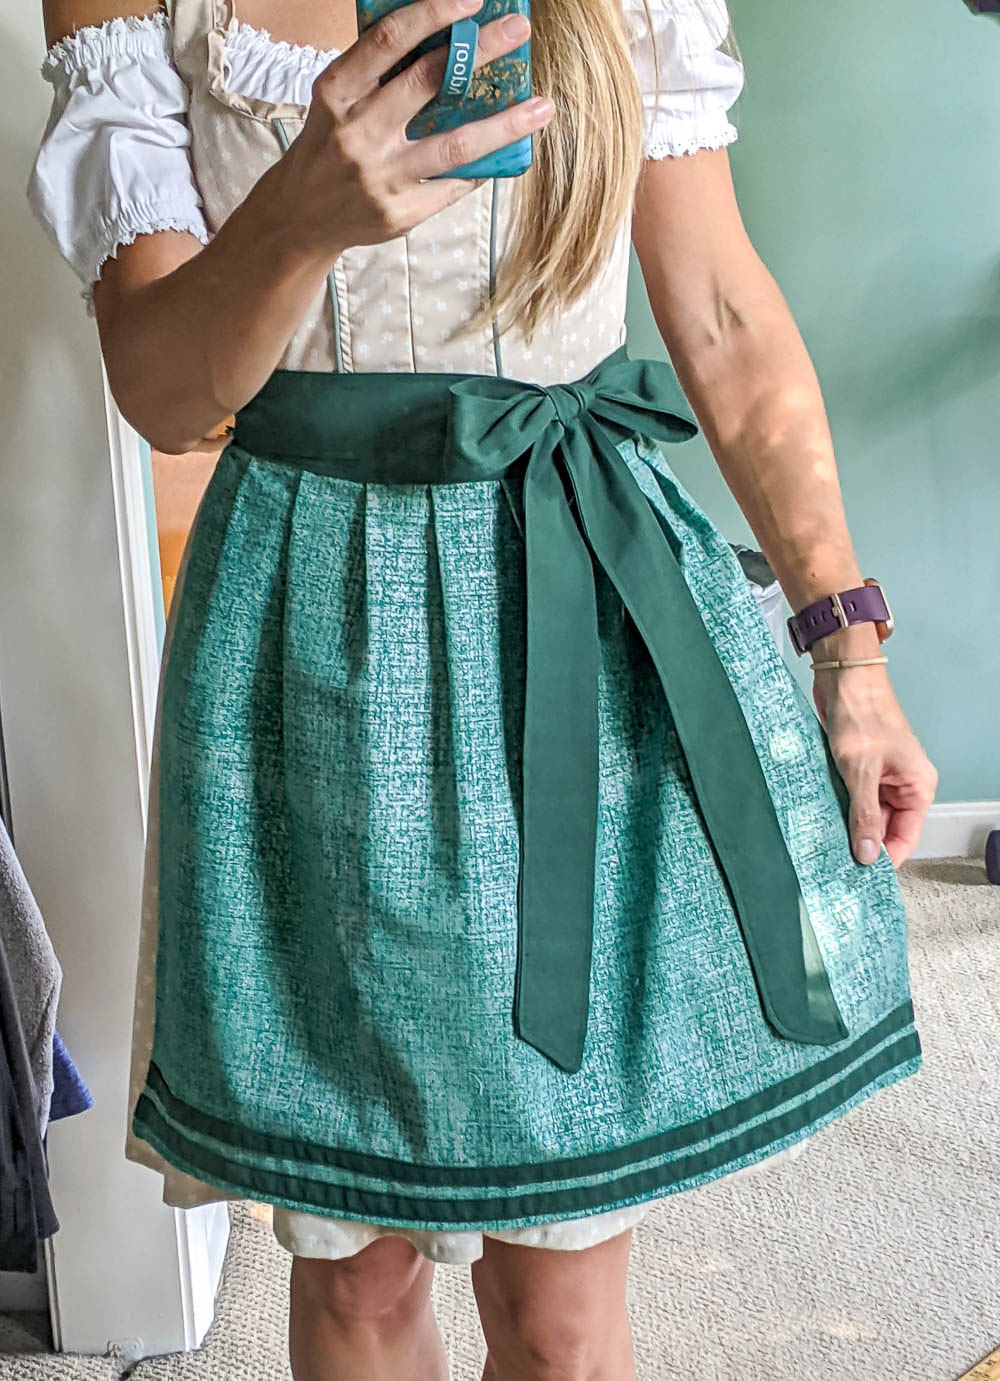 me showing off a teal apron I made